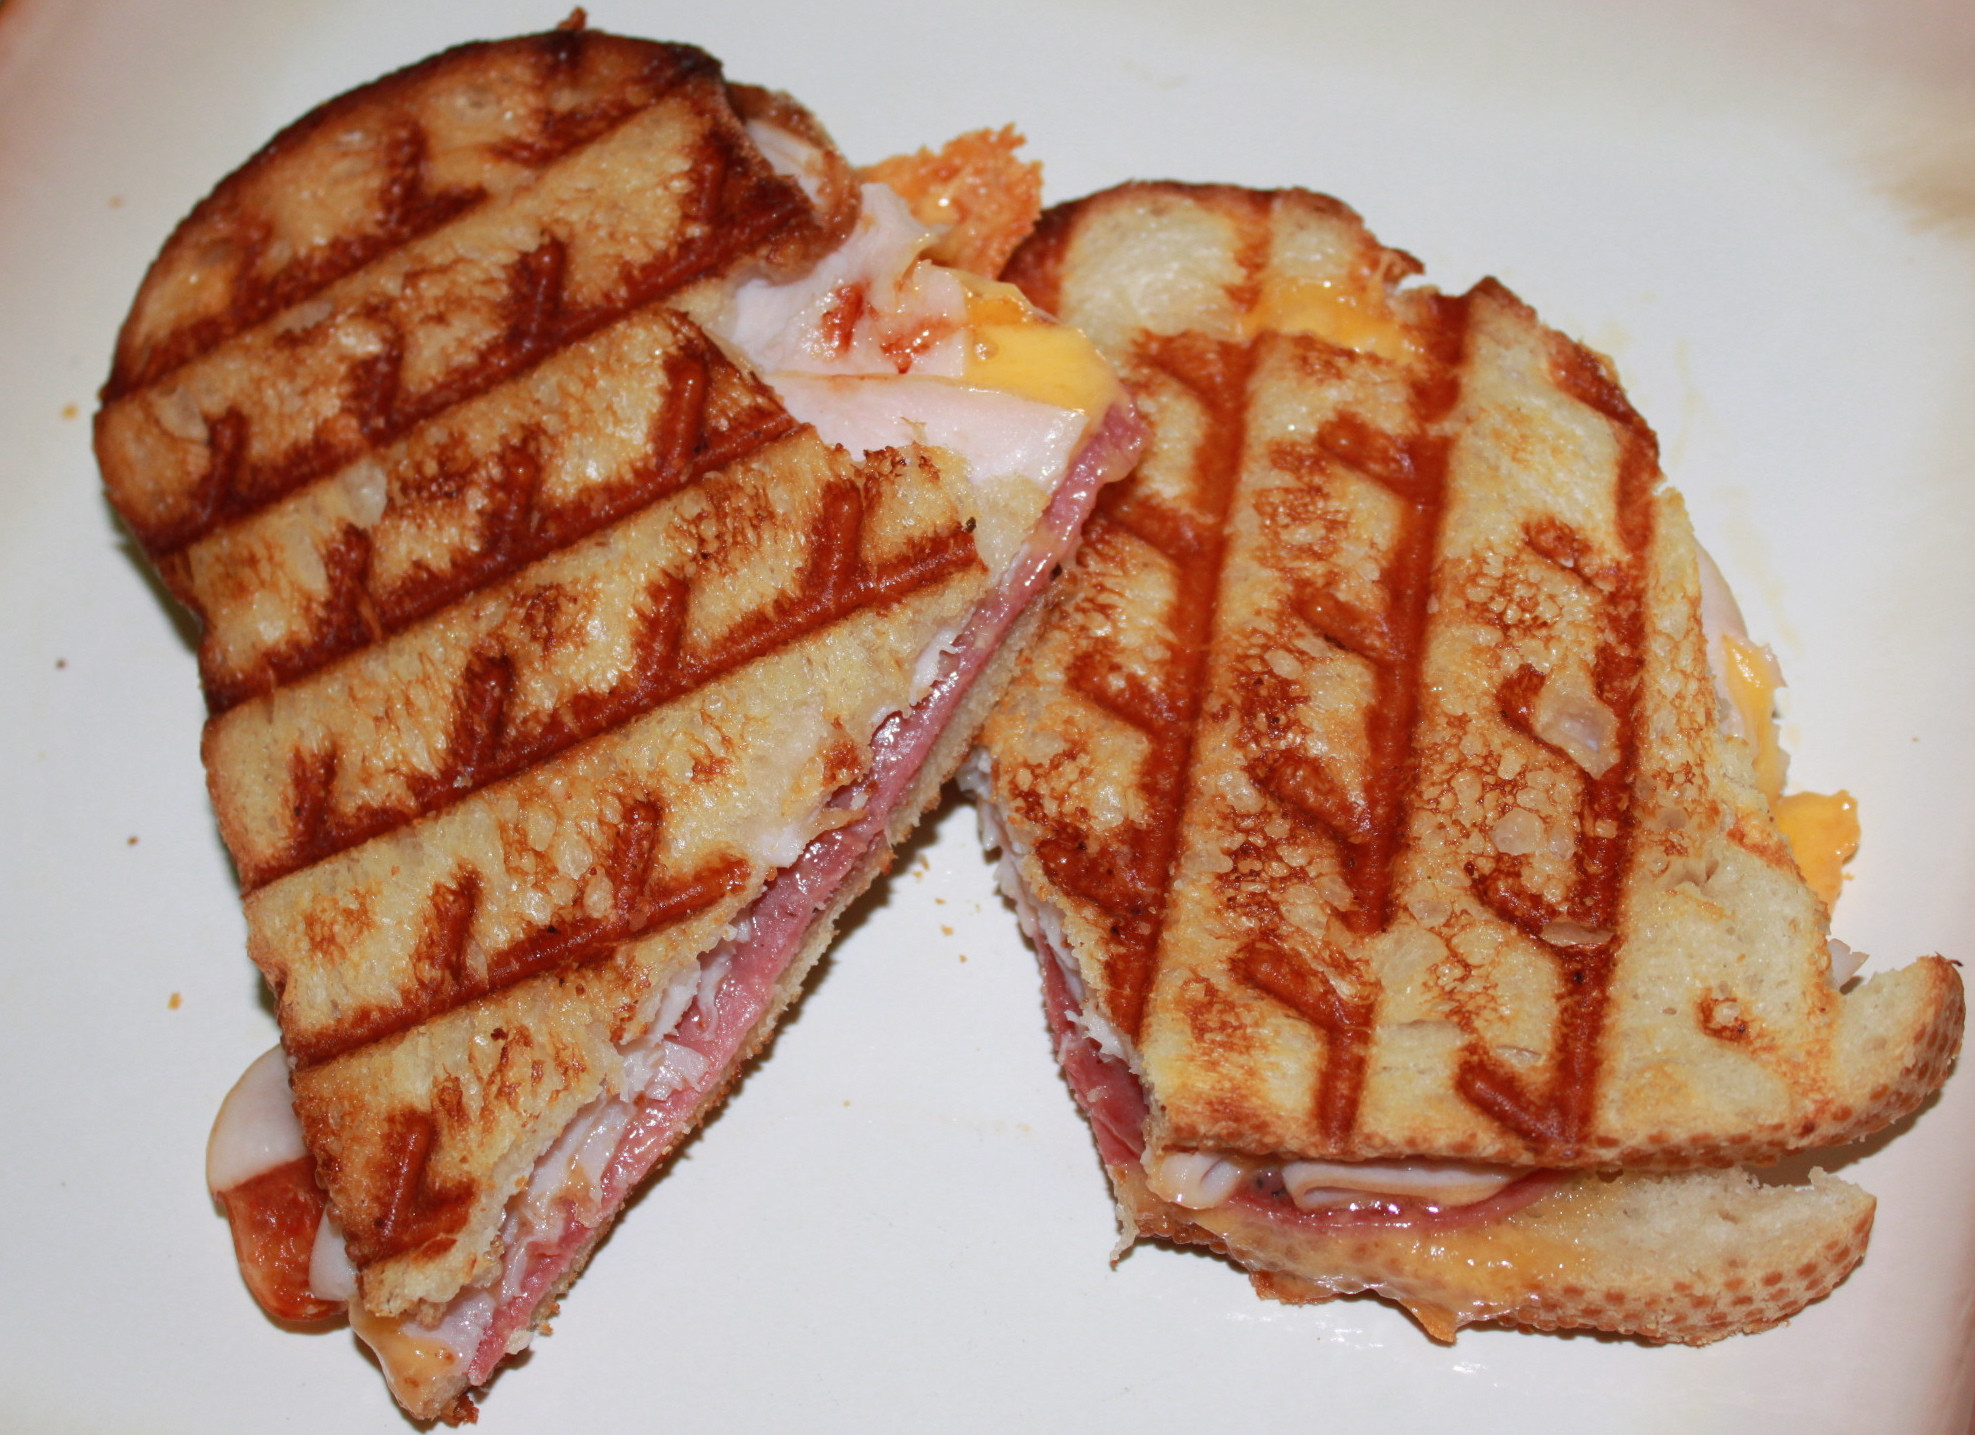 George Foreman Grill Recipes Panini
 George Foreman Evolve Grill Review & Panini Club Melt Recipe